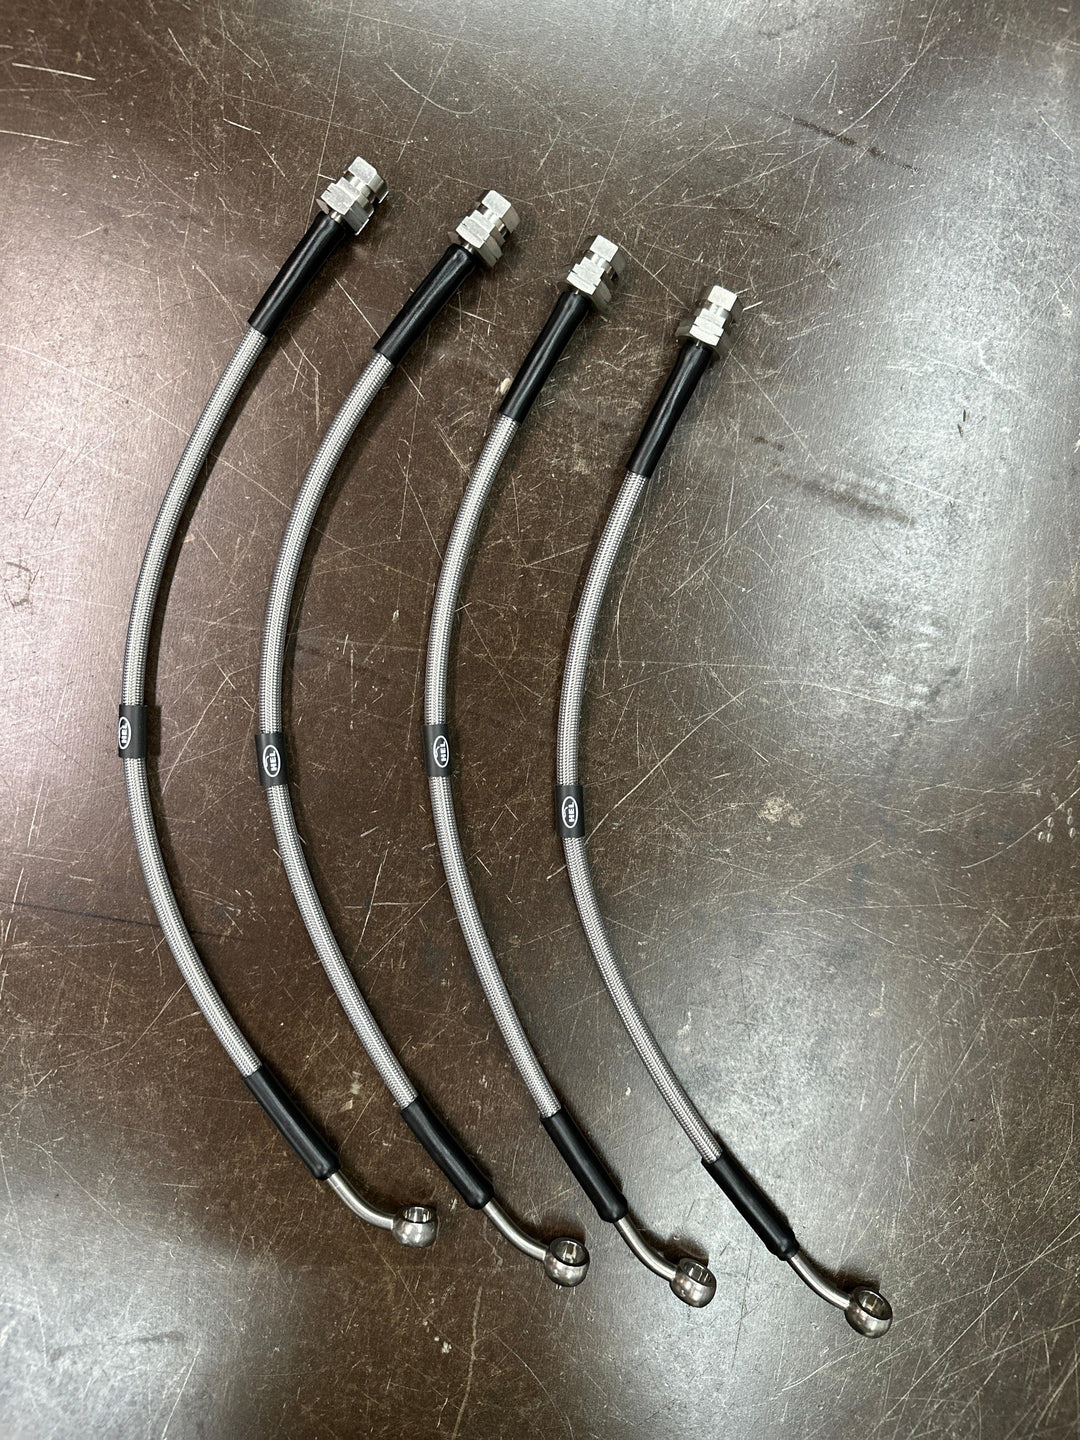 HEL Performance Braided Brake Lines for Chevrolet Corvette C5 5.7 (1997-2004) - Attacking the Clock Racing